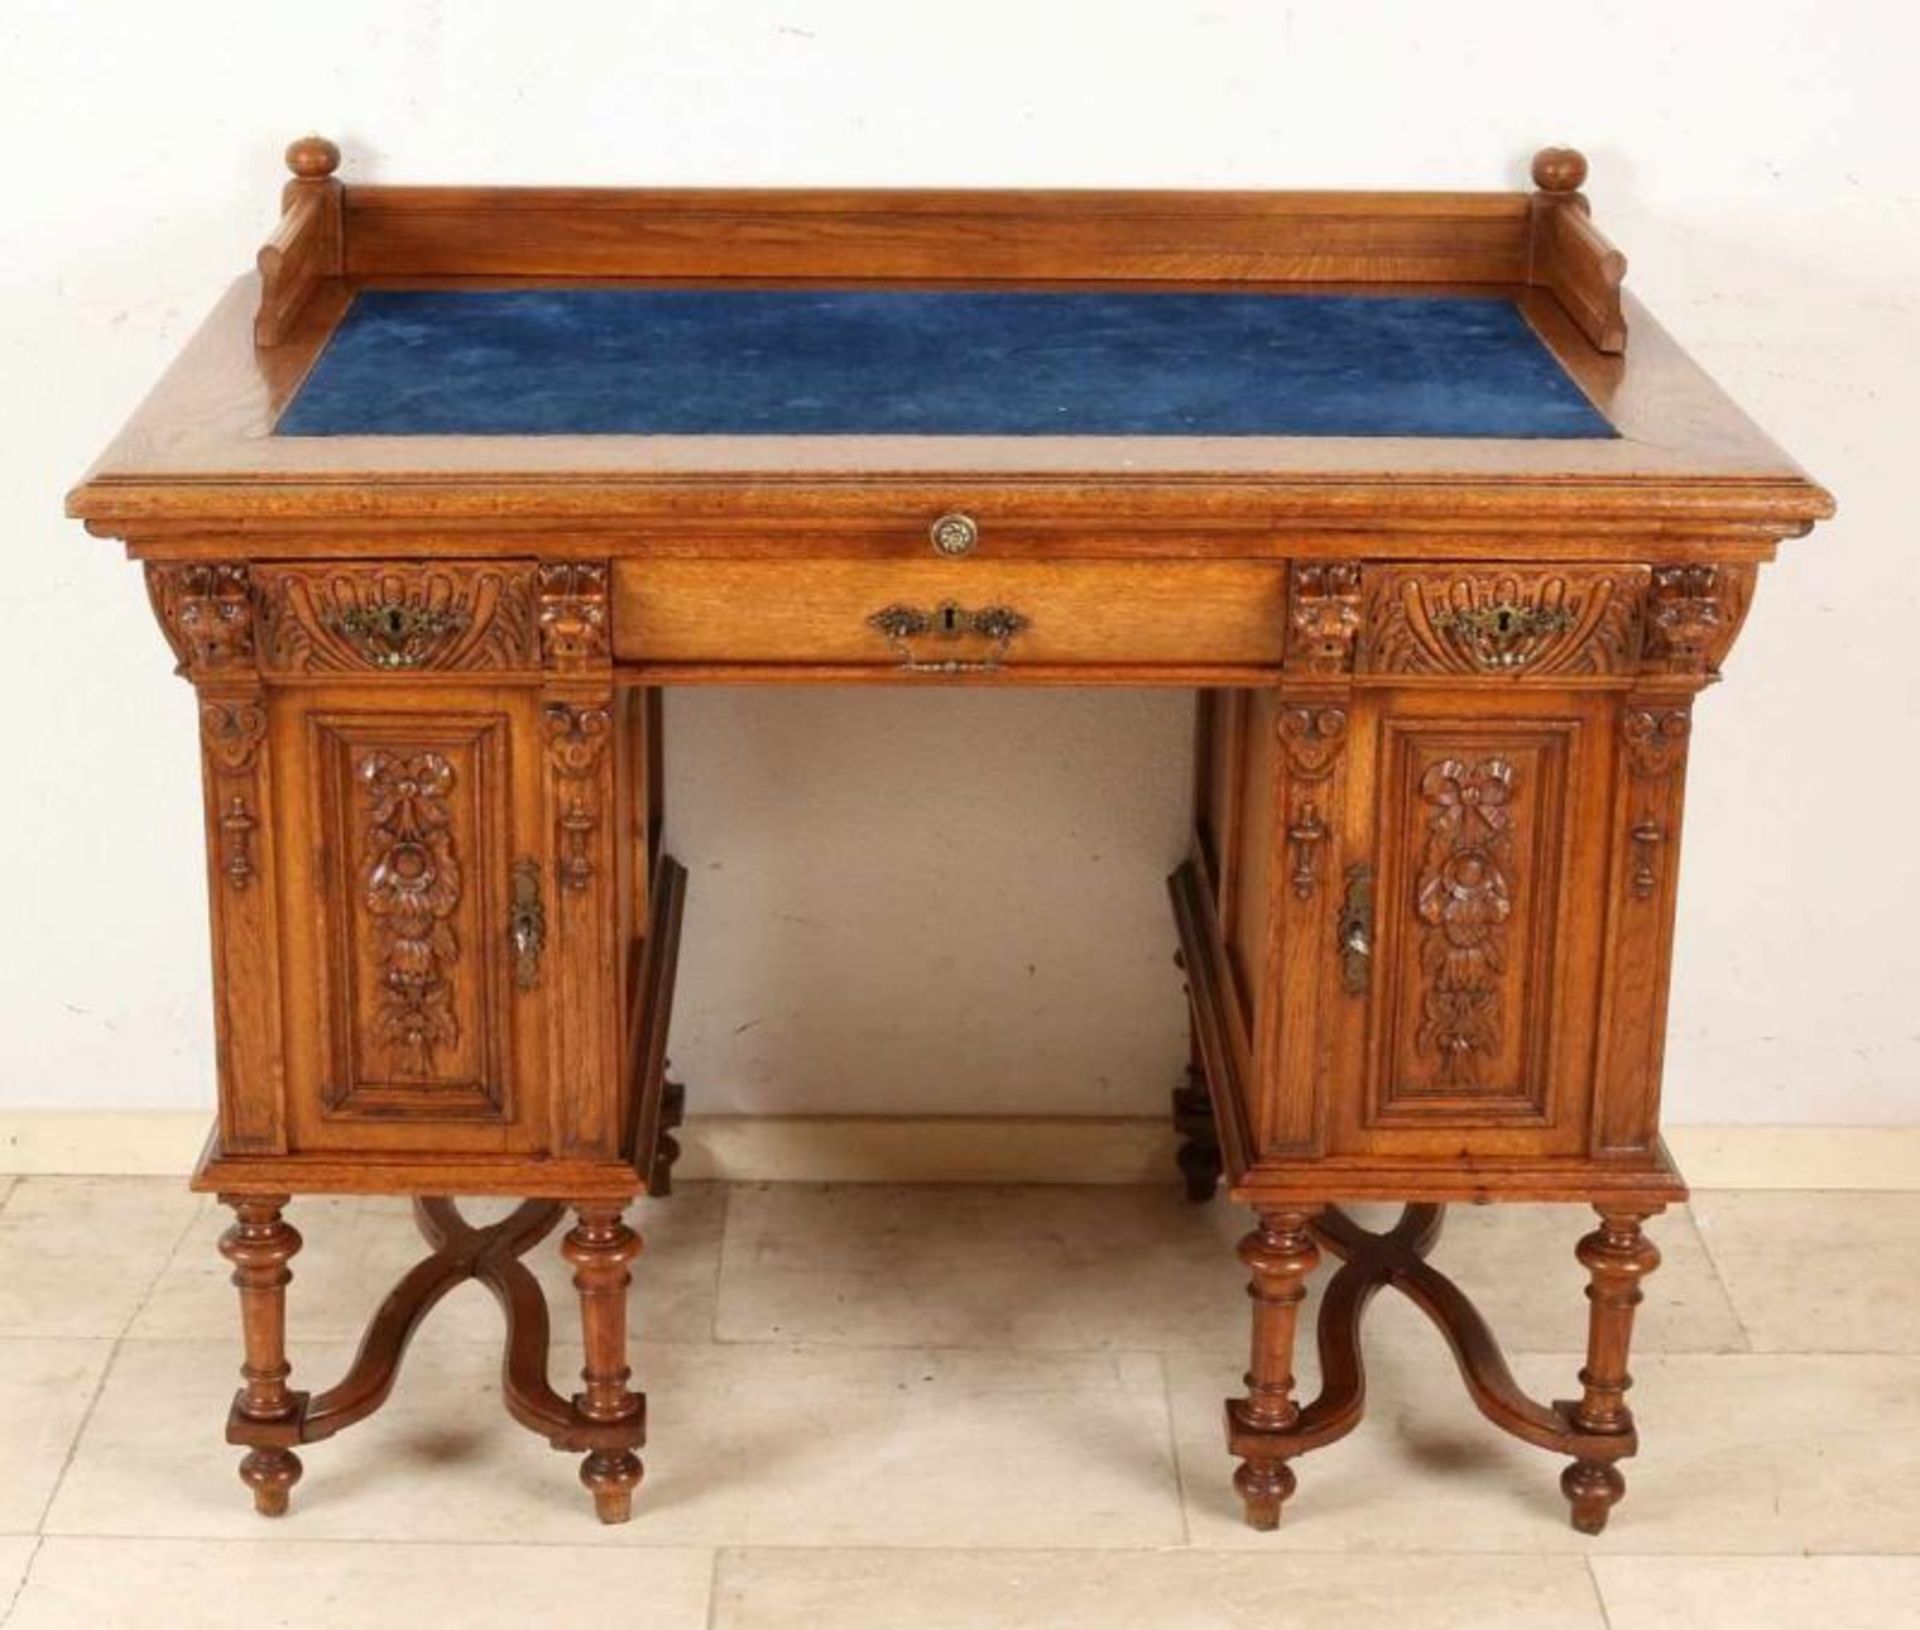 19th Century oak historicism writing desk with lion heads, three drawers and crossed legs. Circa